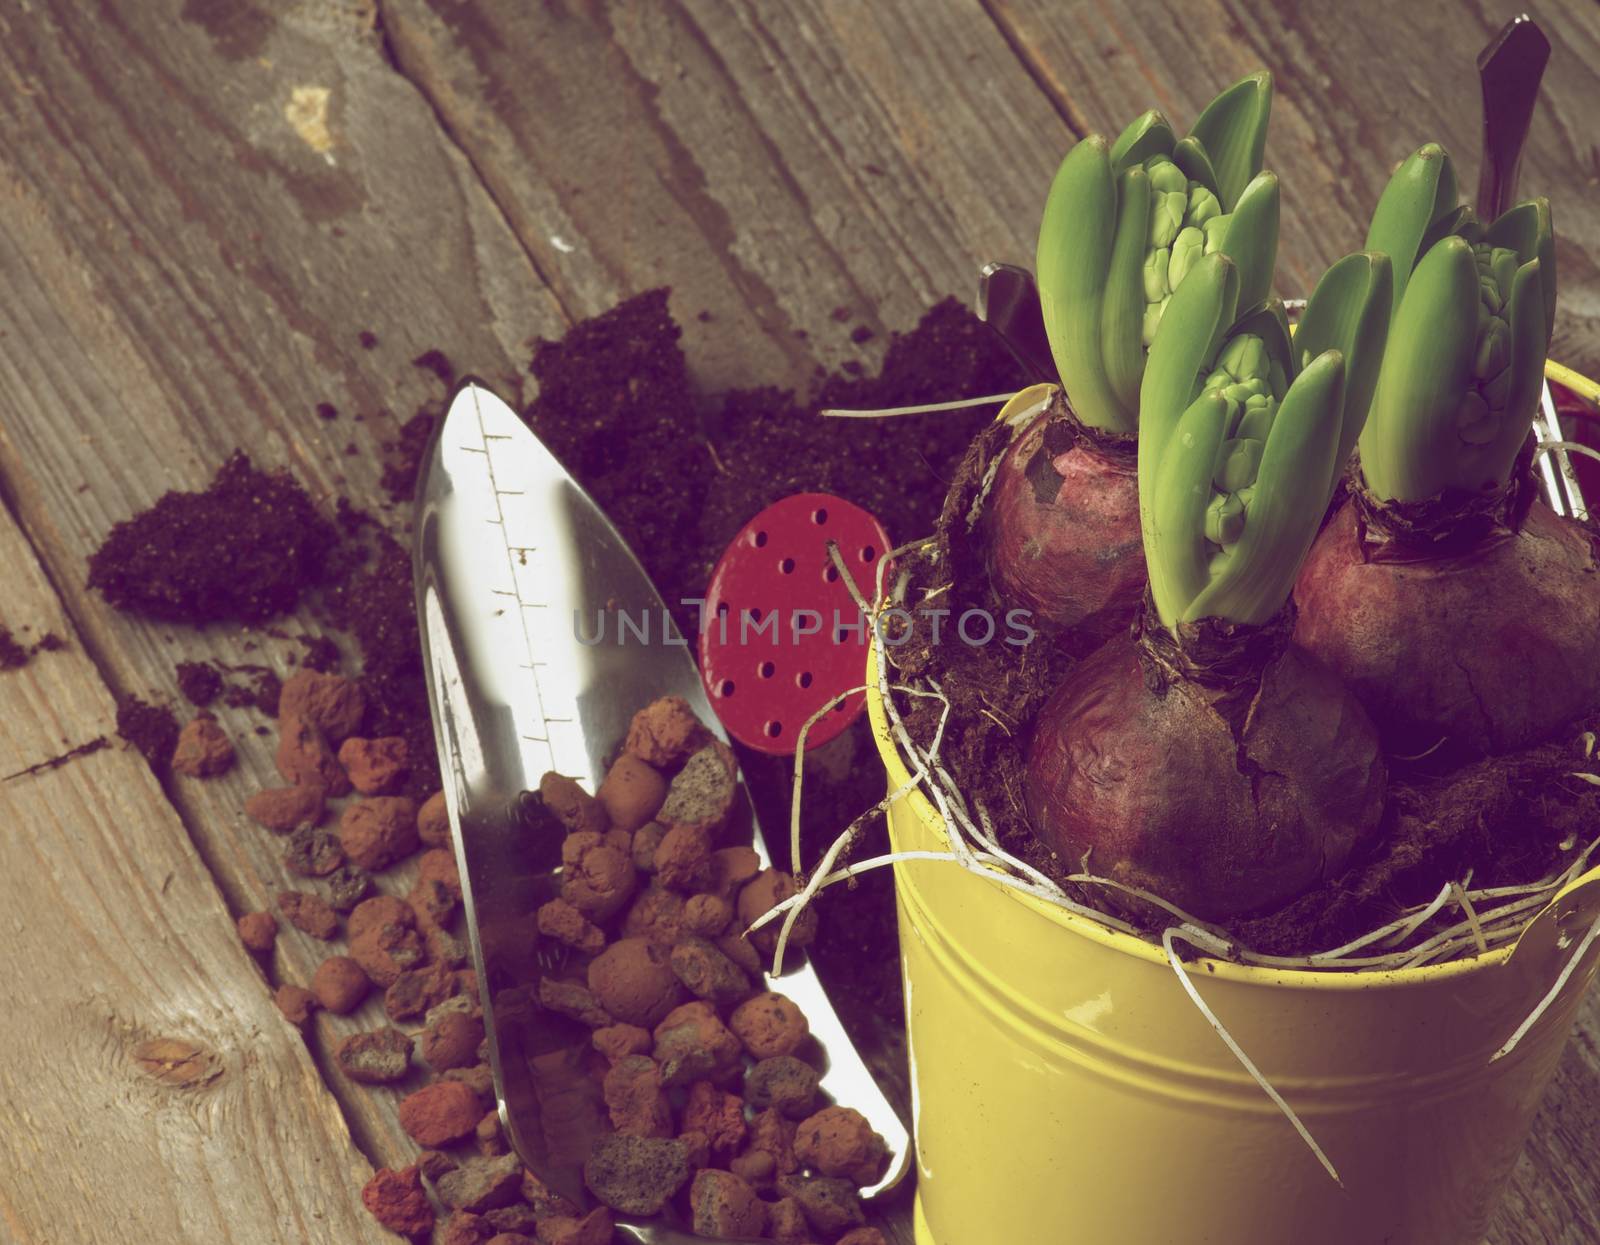 Planting Hyacinth Bulbs with Gardening Tools closeup on Rustic Wooden background. Retro Styled